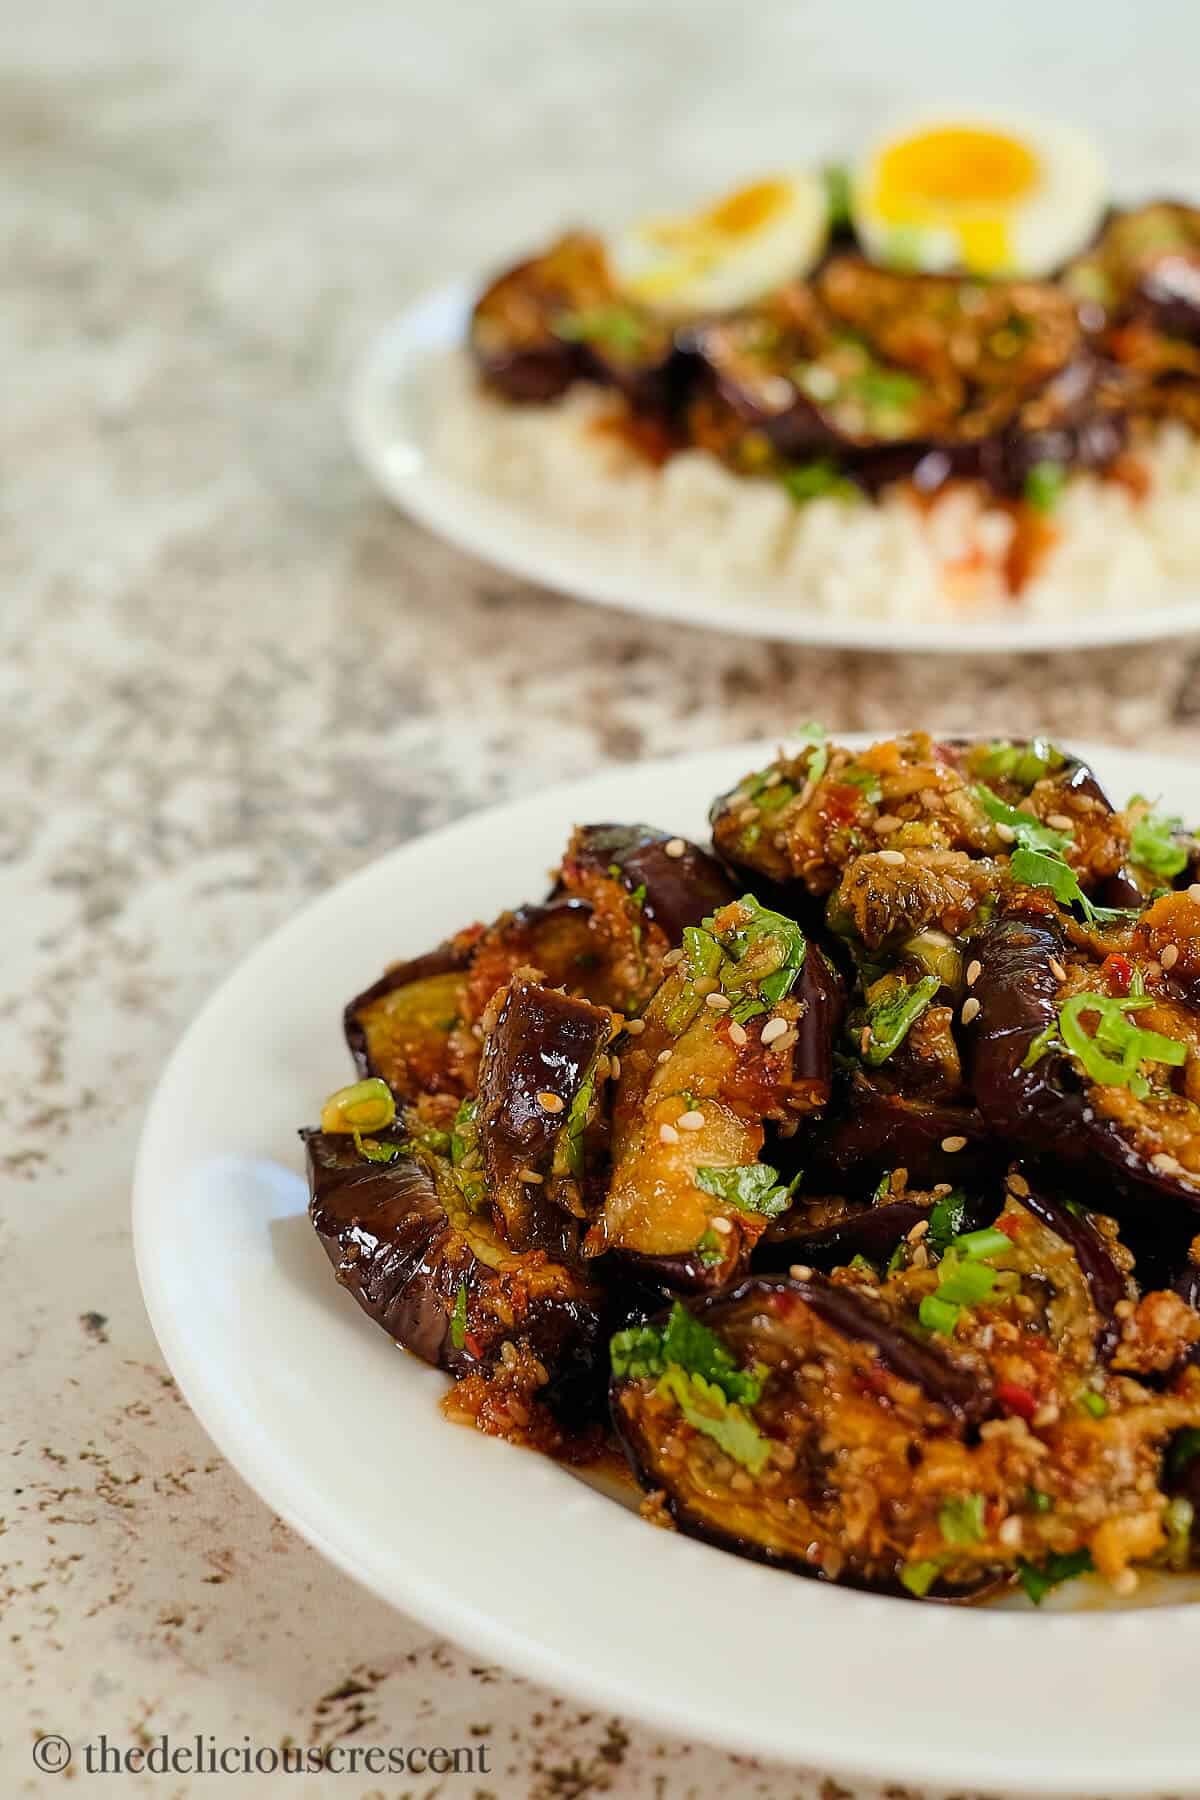 Eggplant roasted in Asian style and served.